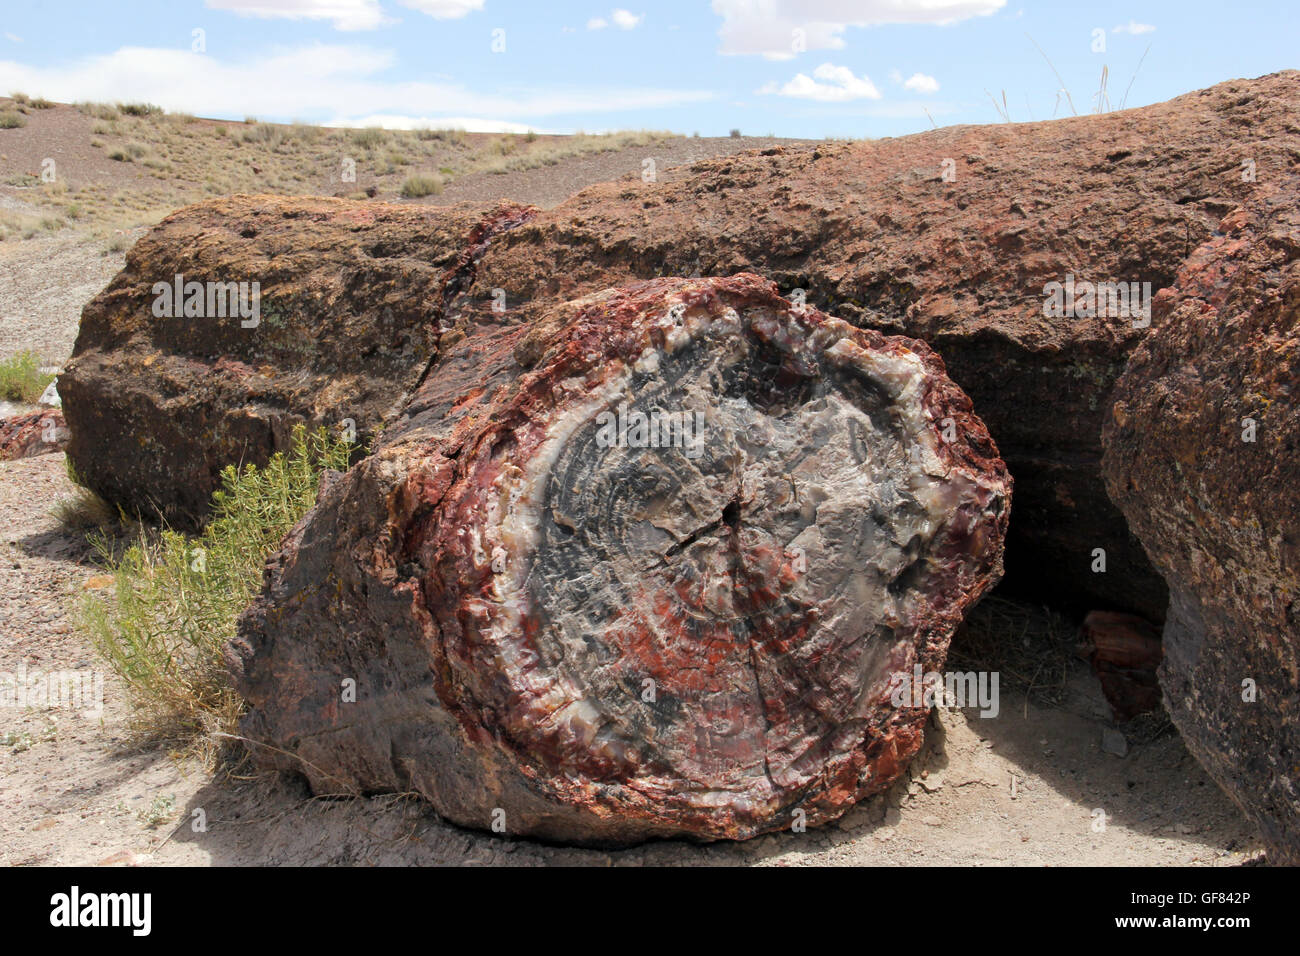 Log of Petrified wood specimen in it's natural outdoor setting Stock Photo